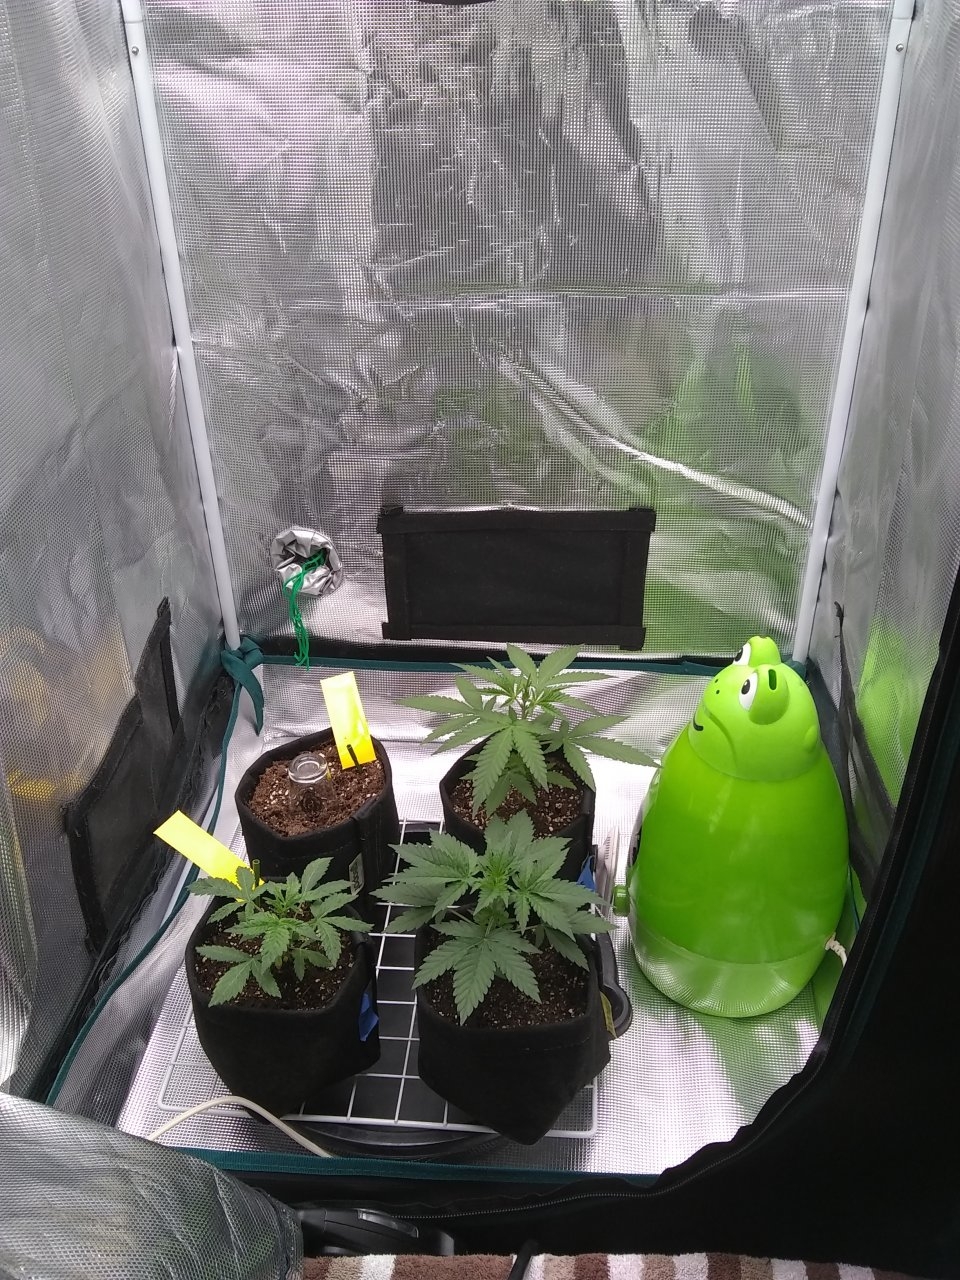 A tent with plants added for effect